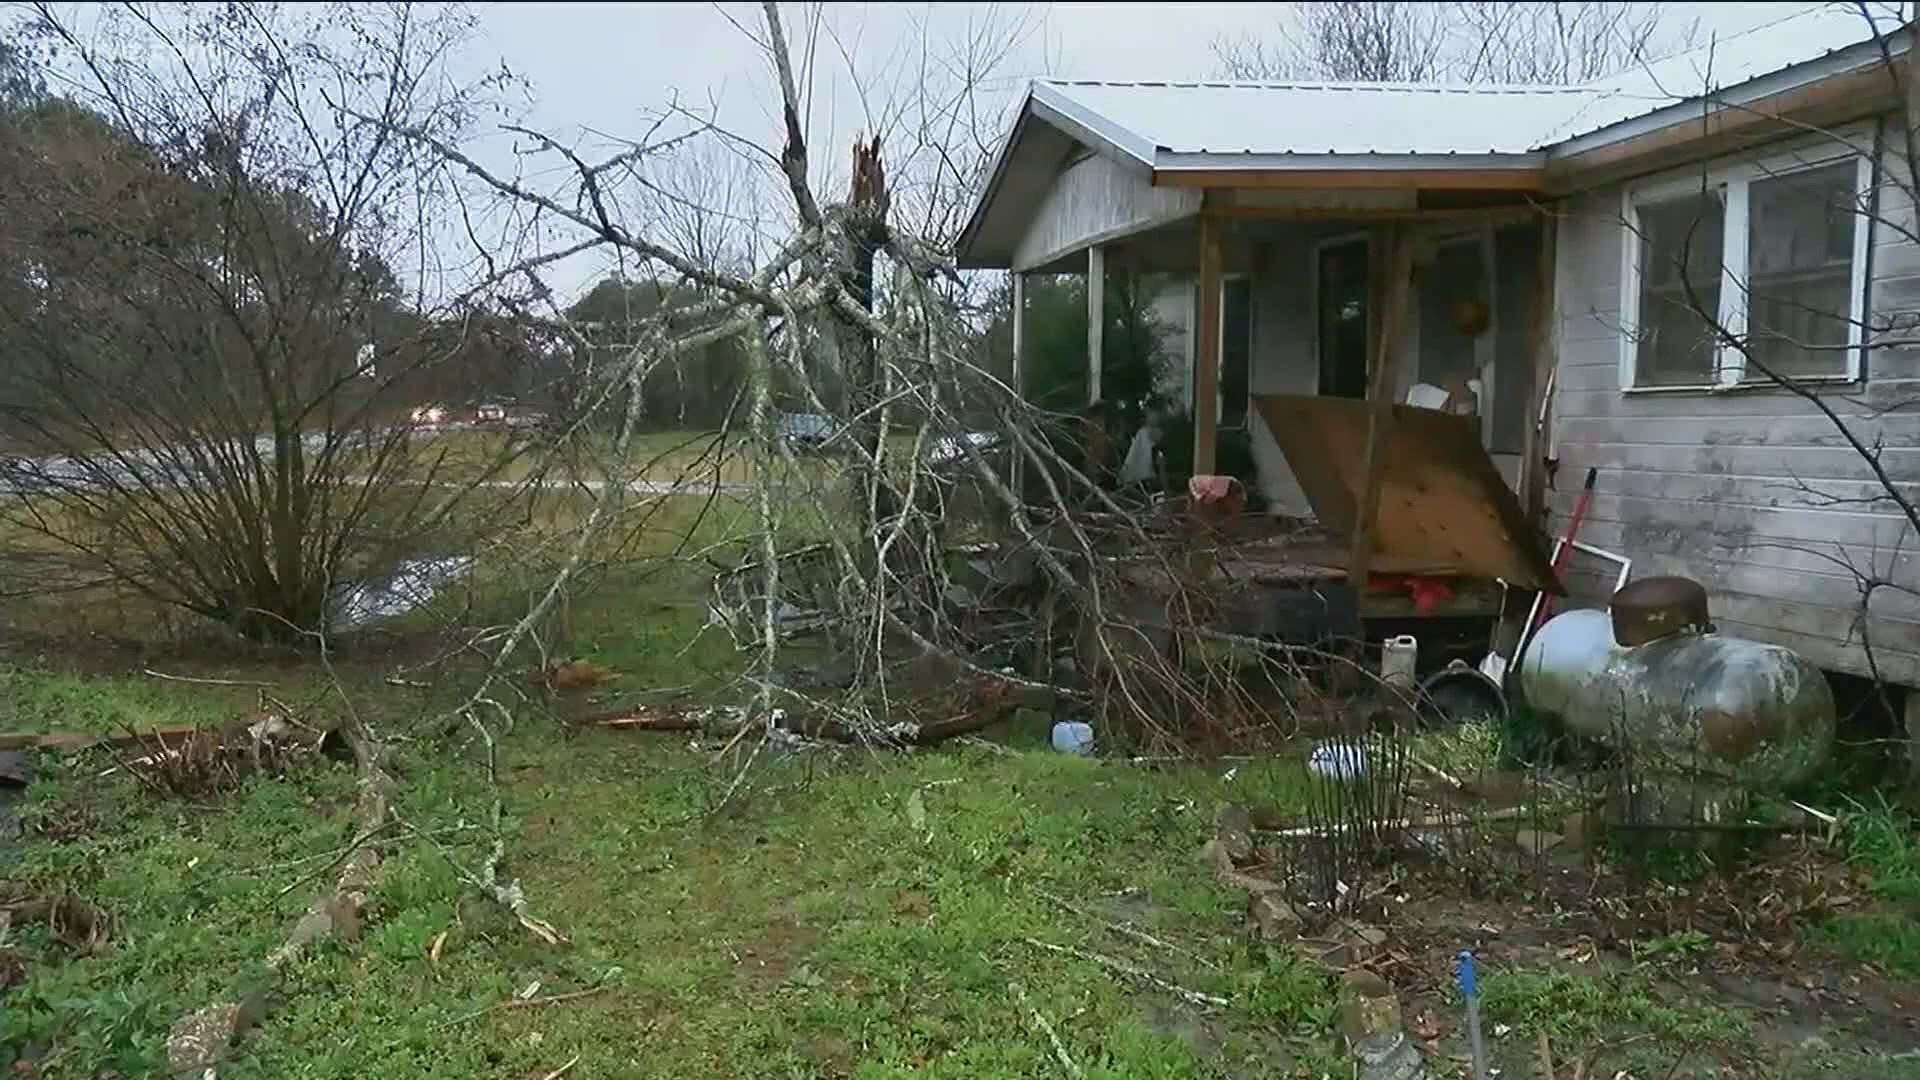 The tornado struck south of the Albany area.